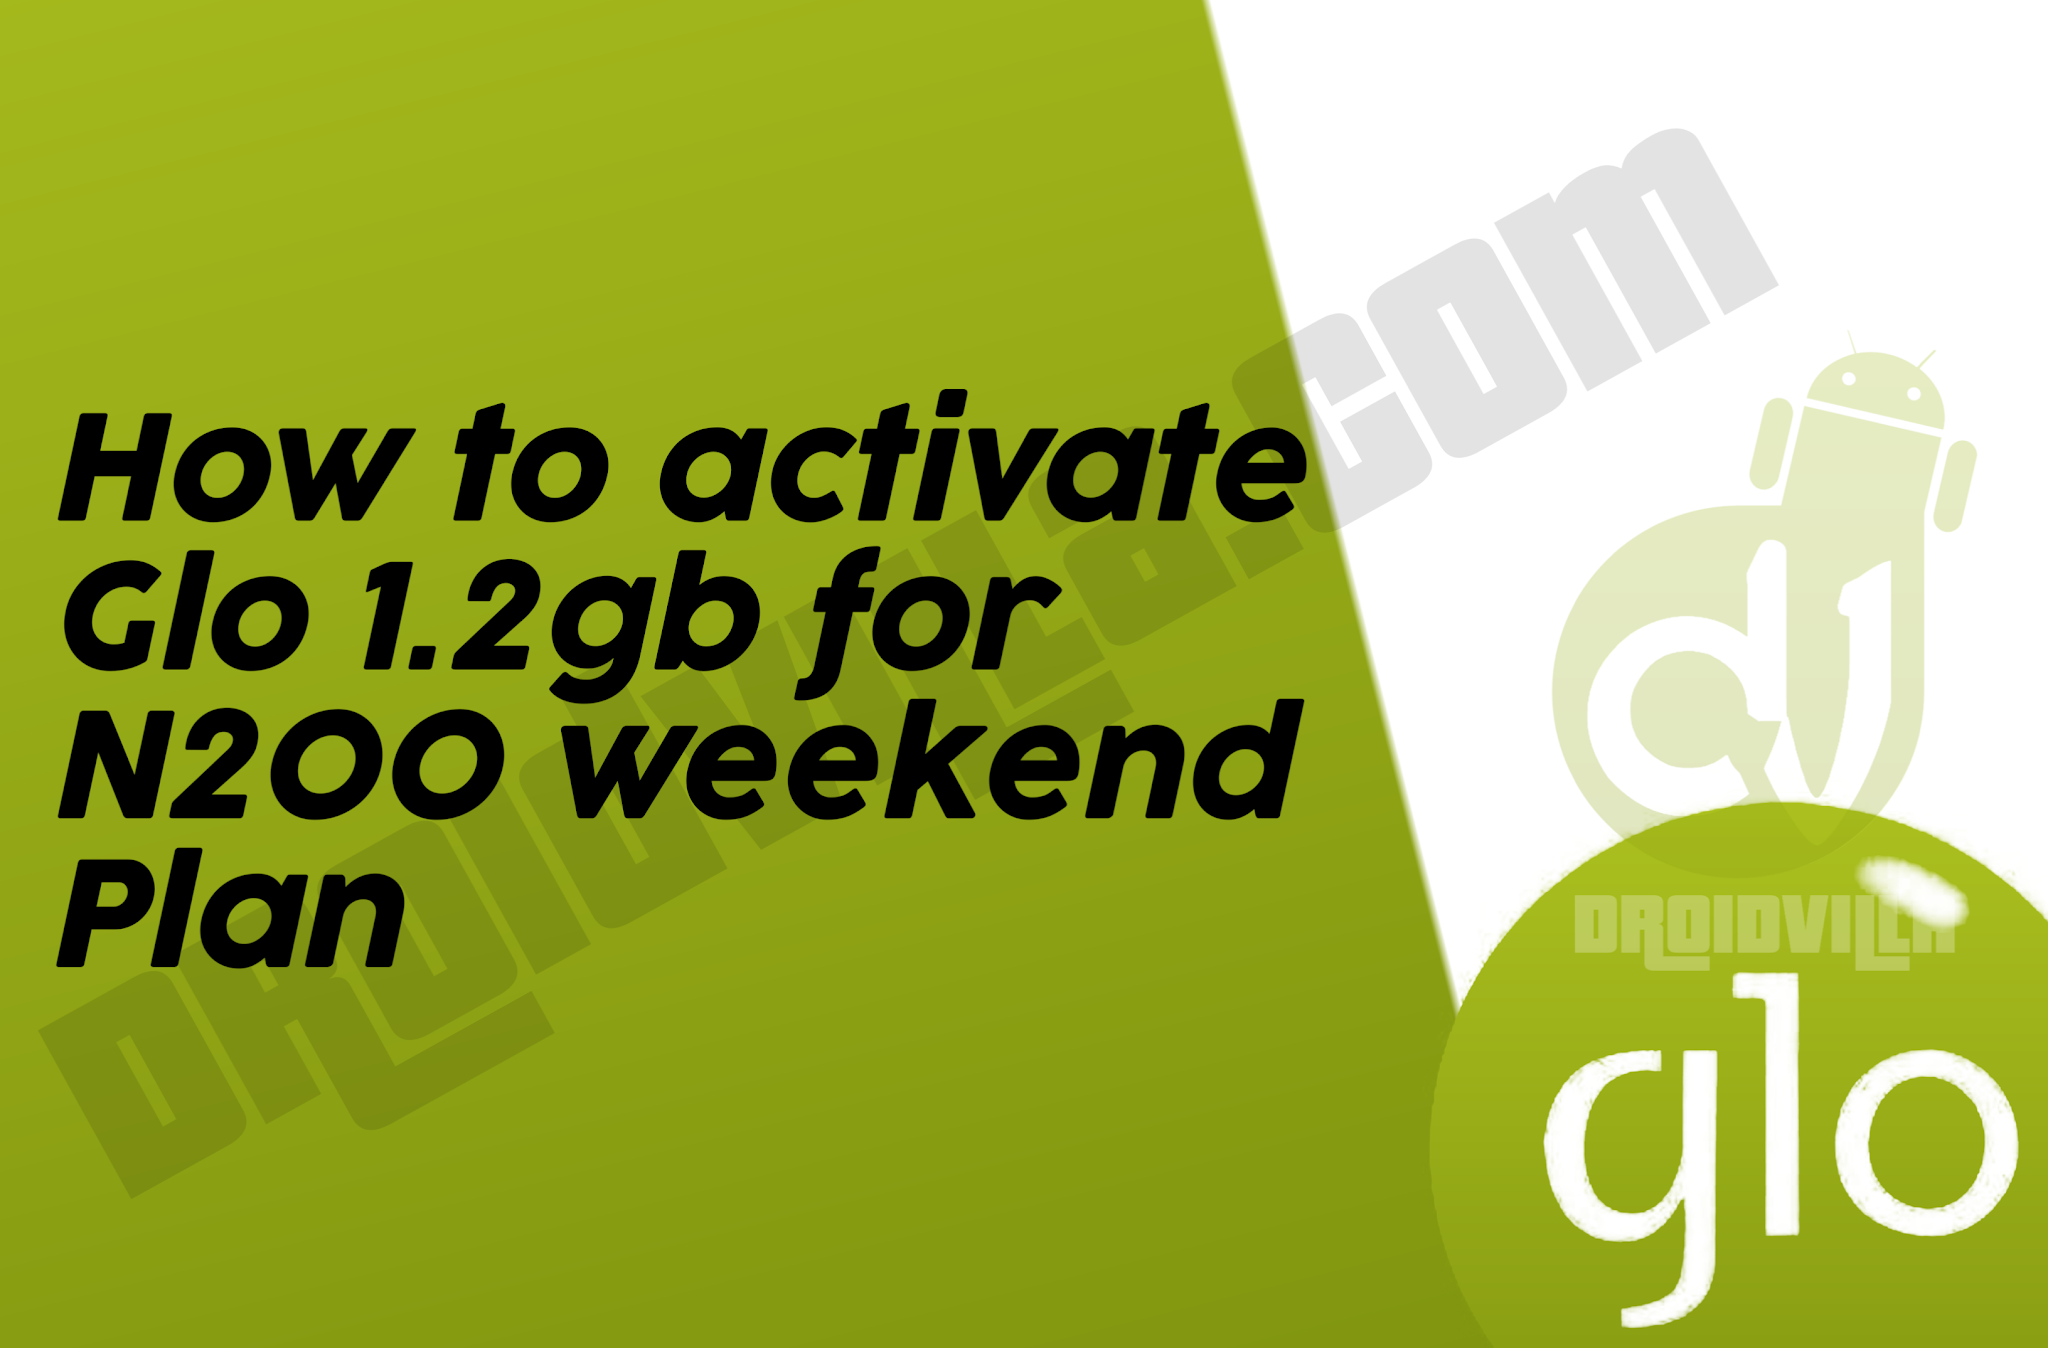 how-to-activate-glo-12gb-for-n200-sunday-plan-in-2021-droidvilla-technology-solution-android-apk-phone-reviews-technology-updates-tipstricks